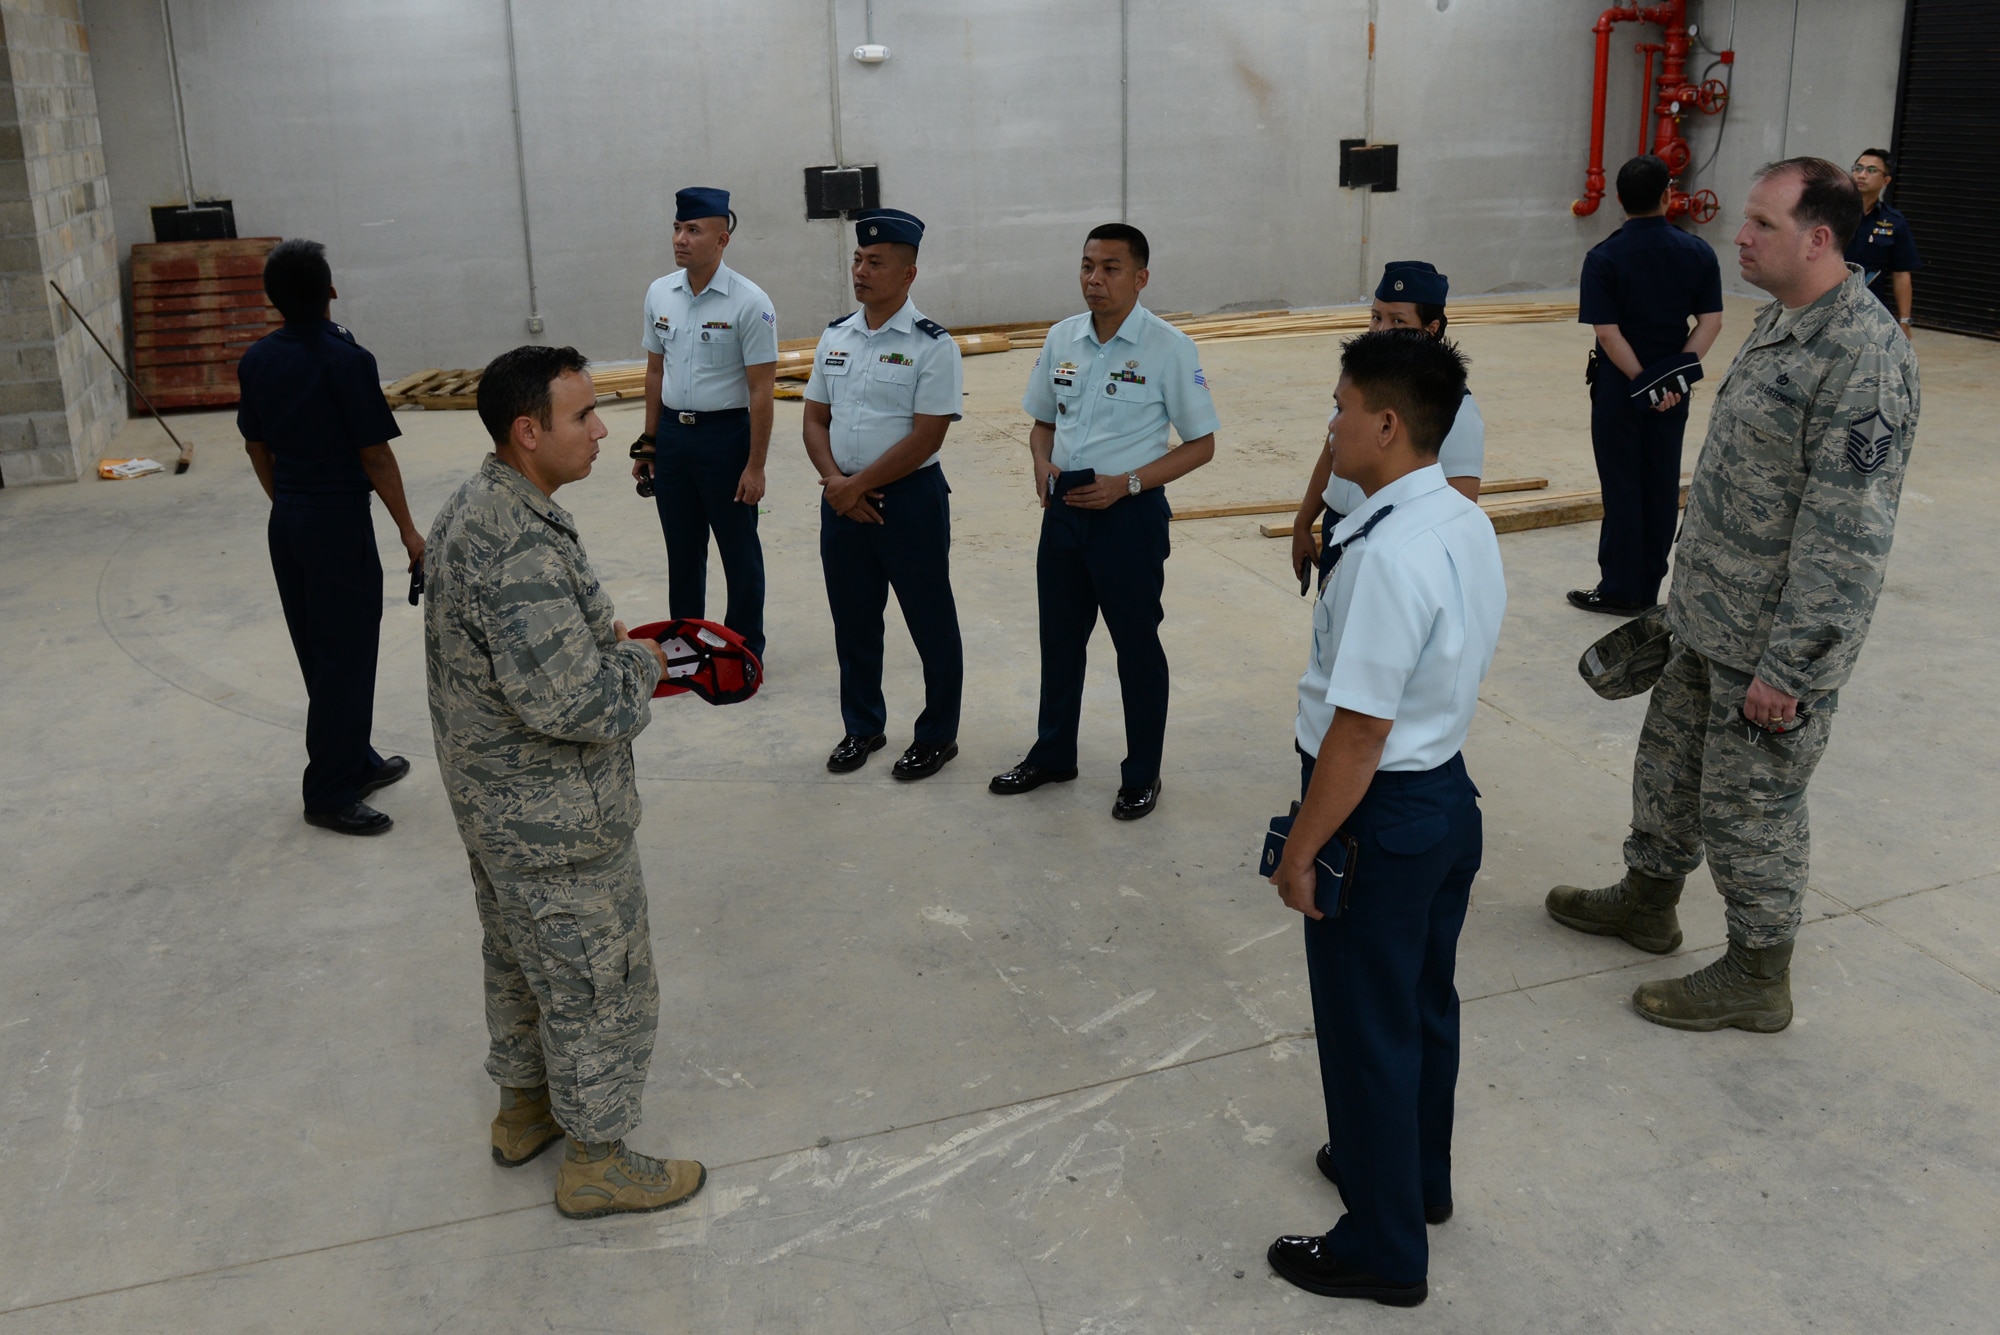 Participants of a Pacific Unity multilateral tilt-up construction workshop tour a facility built with the tilt-up construction method May 10, 2016, at Andersen Air Force Base, Guam. Pacific Unity engagements facilitate the building of military partnerships, building capacity, and increasing interoperability among the U.S. Air Force and participating nations. Tilt-up construction is a building technique that uses concrete panels which are made horizontally on the ground and then tilted up into their vertical position at the building site. (U.S. Air Force photo by Airman 1st Class Jacob Skovo)